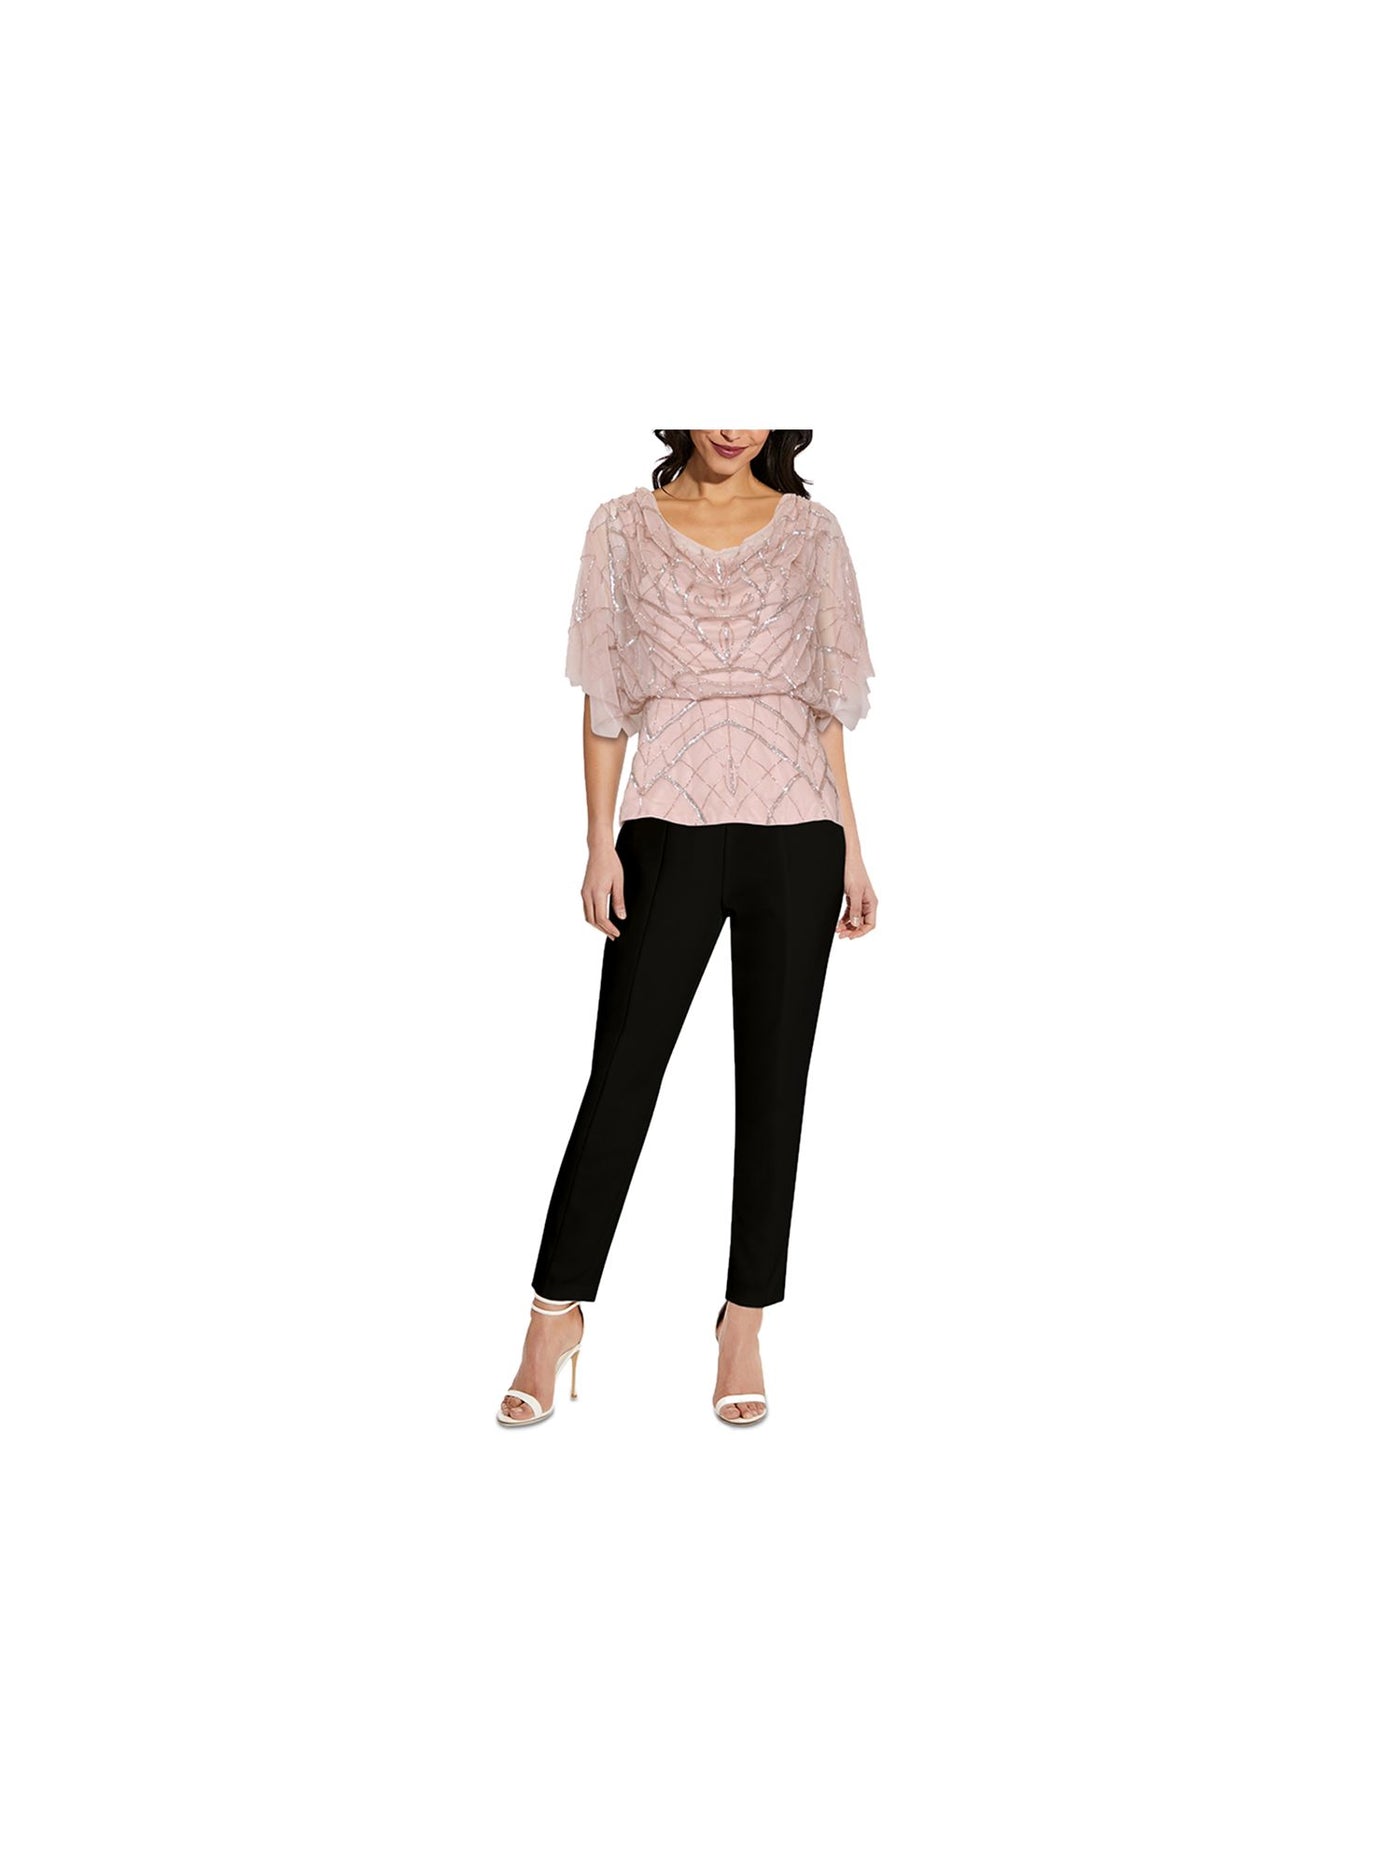 ADRIANNA PAPELL Womens Pink Zippered Beaded Sequin Embellished Flutter Sleeve Cowl Neck Party Top 20